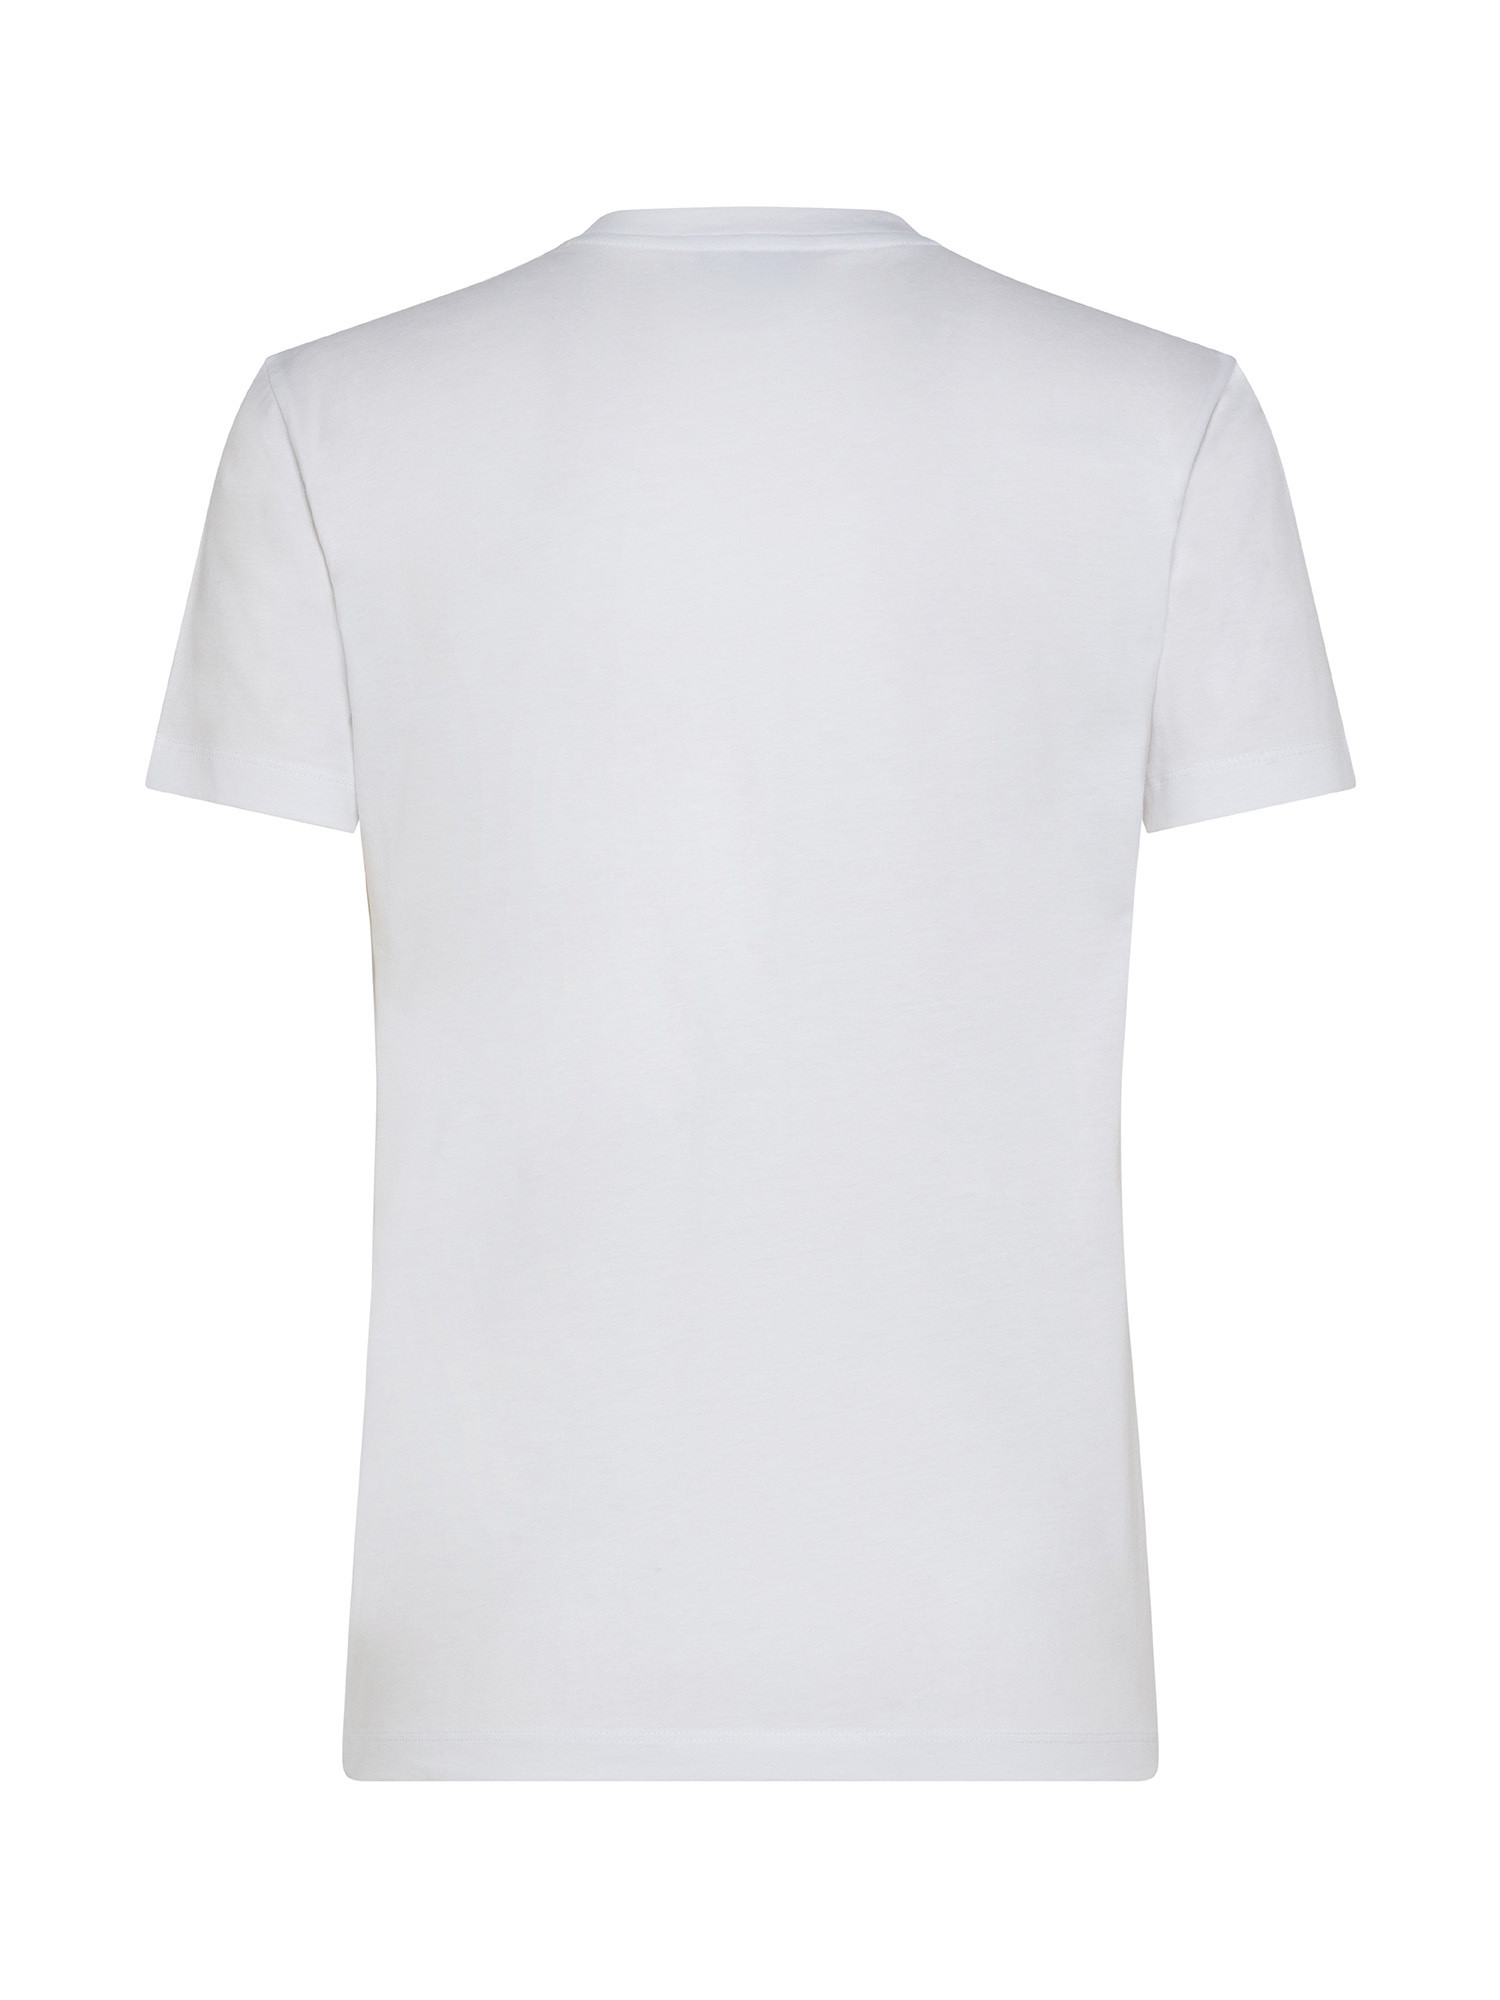 Emporio Armani - Cotton T-shirt with print, White, large image number 1